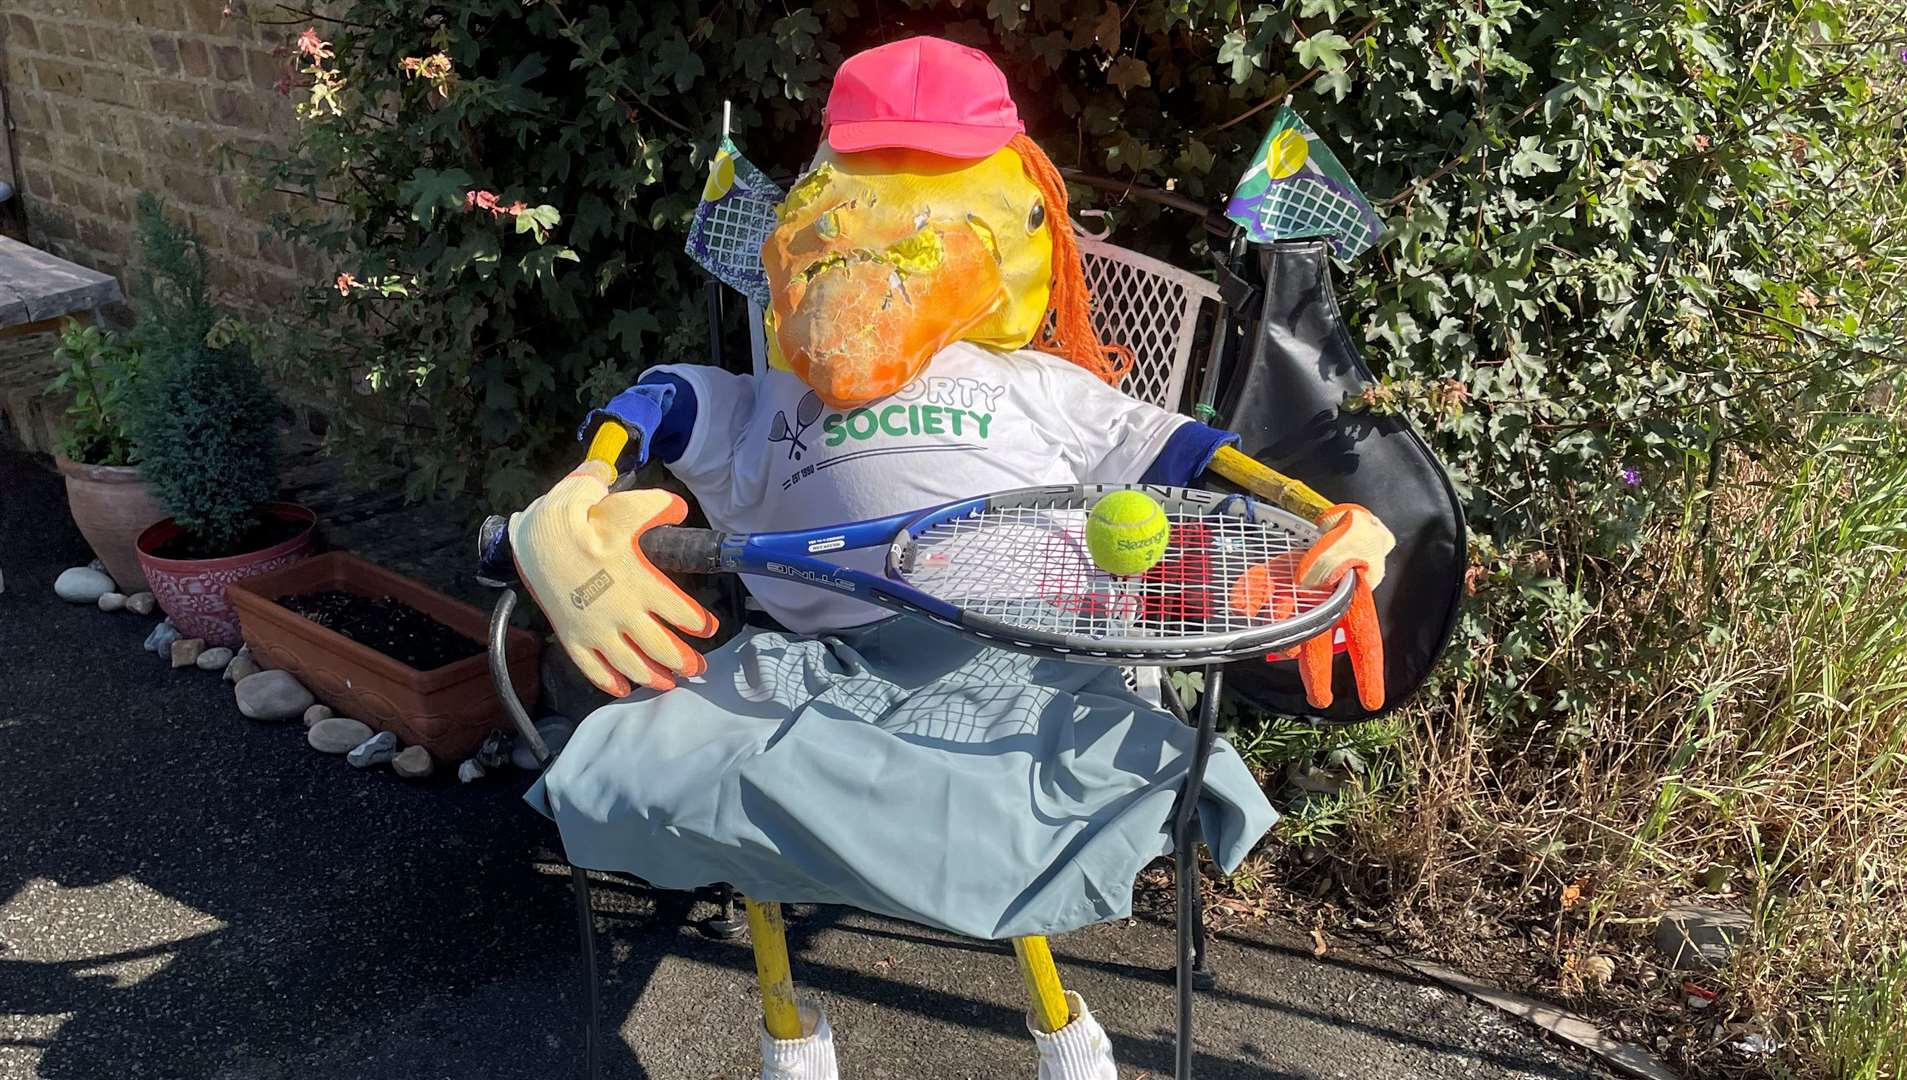 The Colin scarecrow is a big hit with school children in Lower Halstow